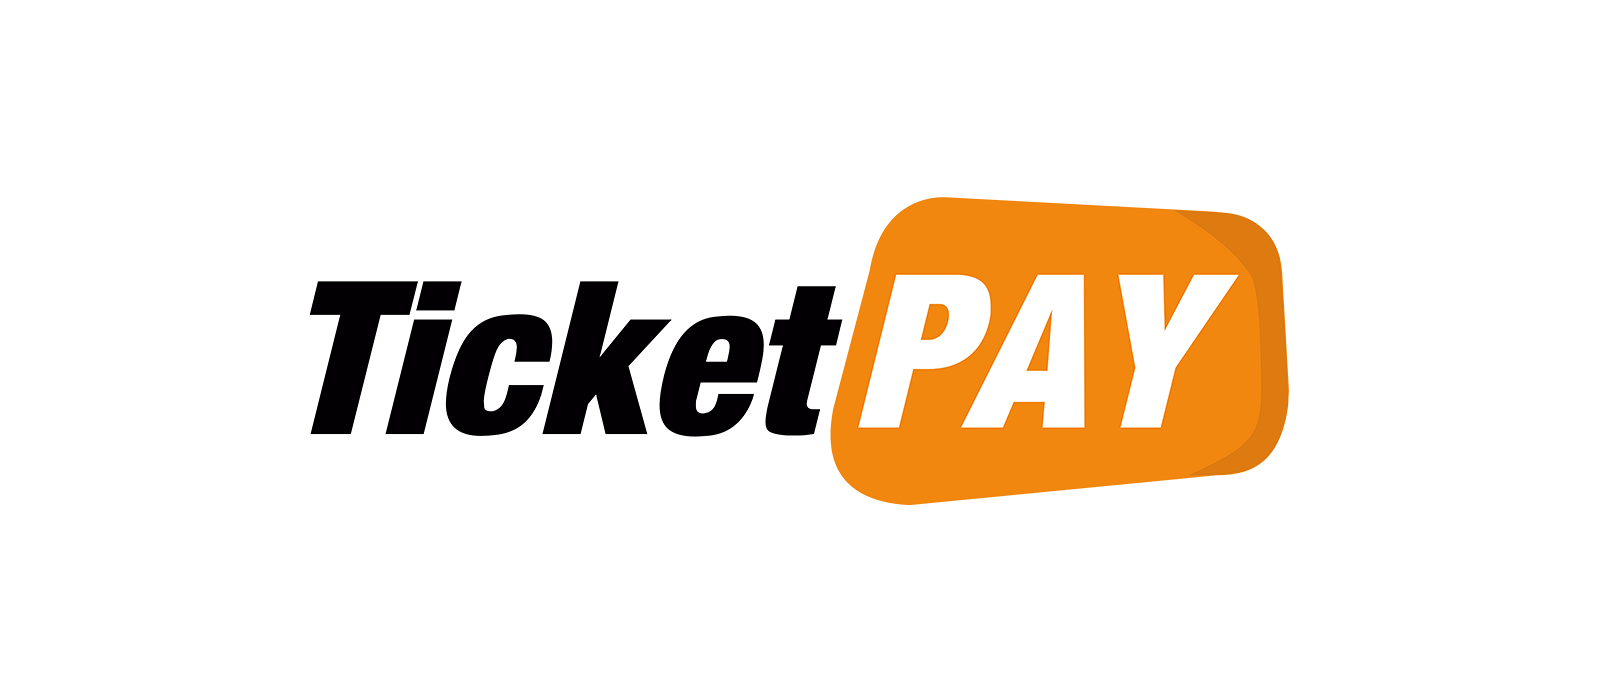 TicketPAY